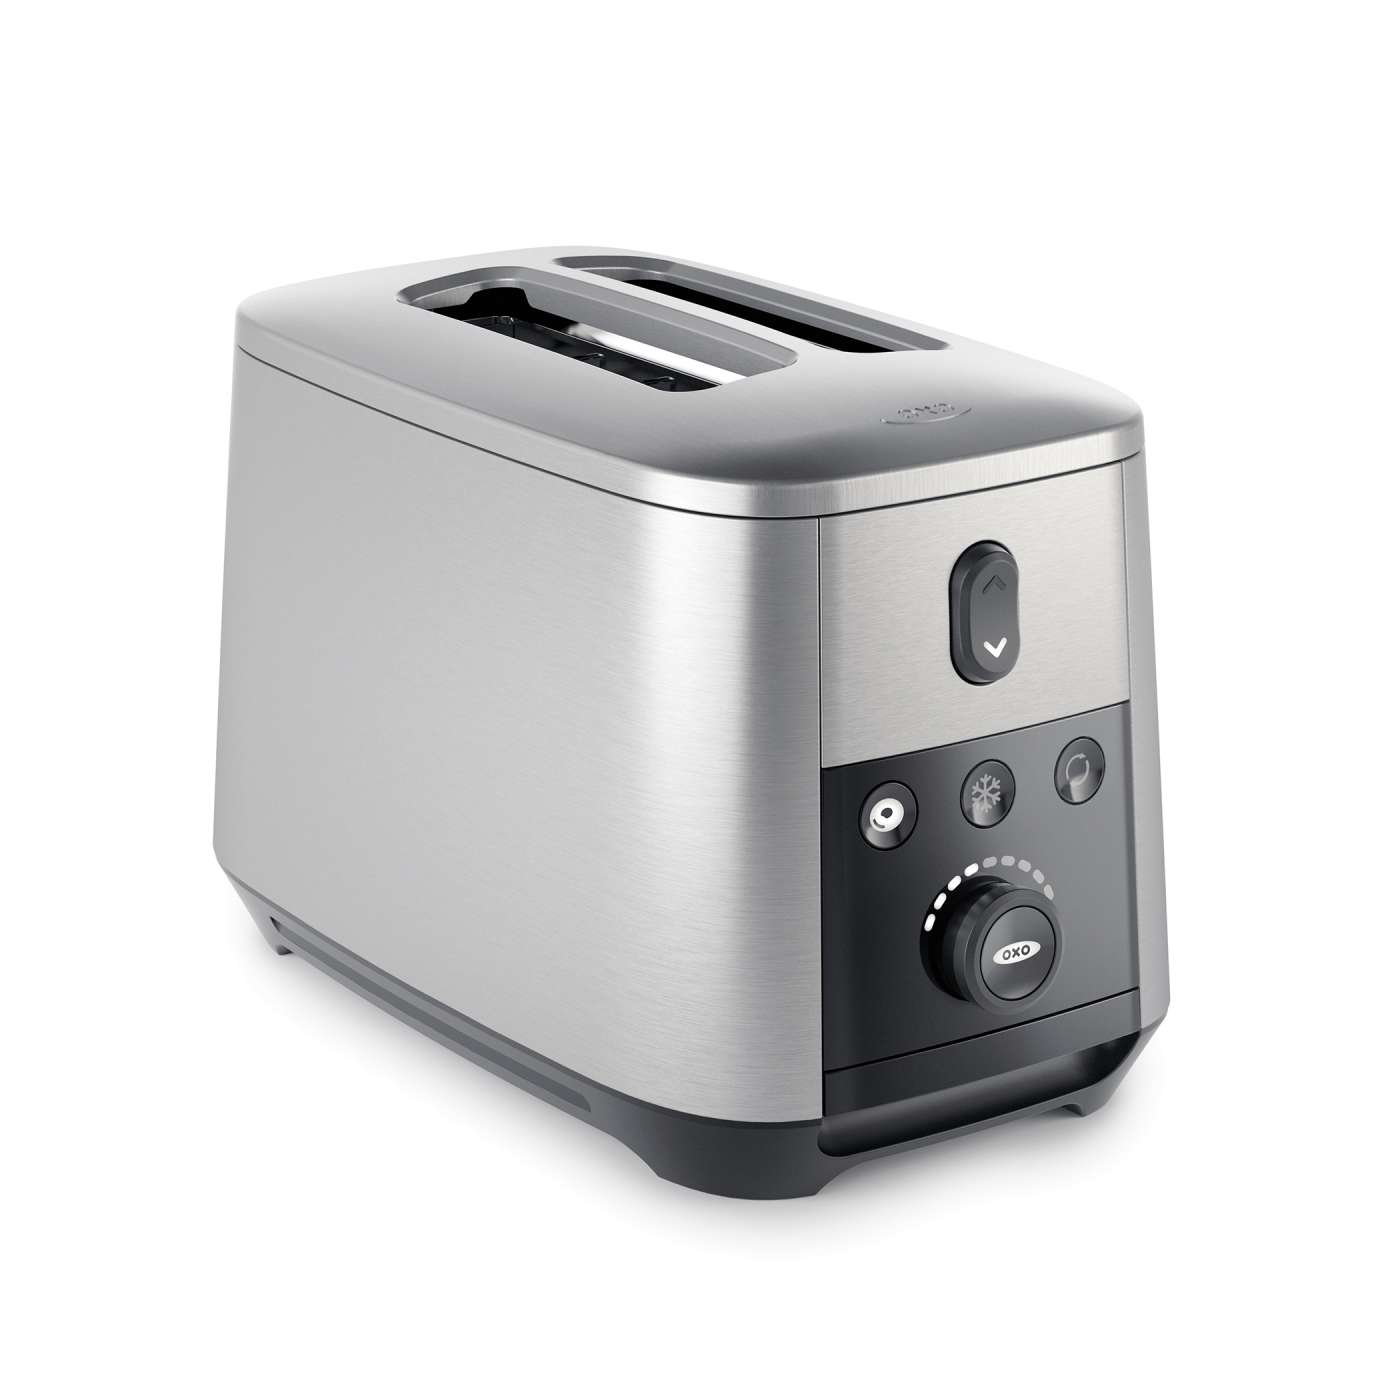 Nice Images Collection: Toaster Desktop Wallpapers